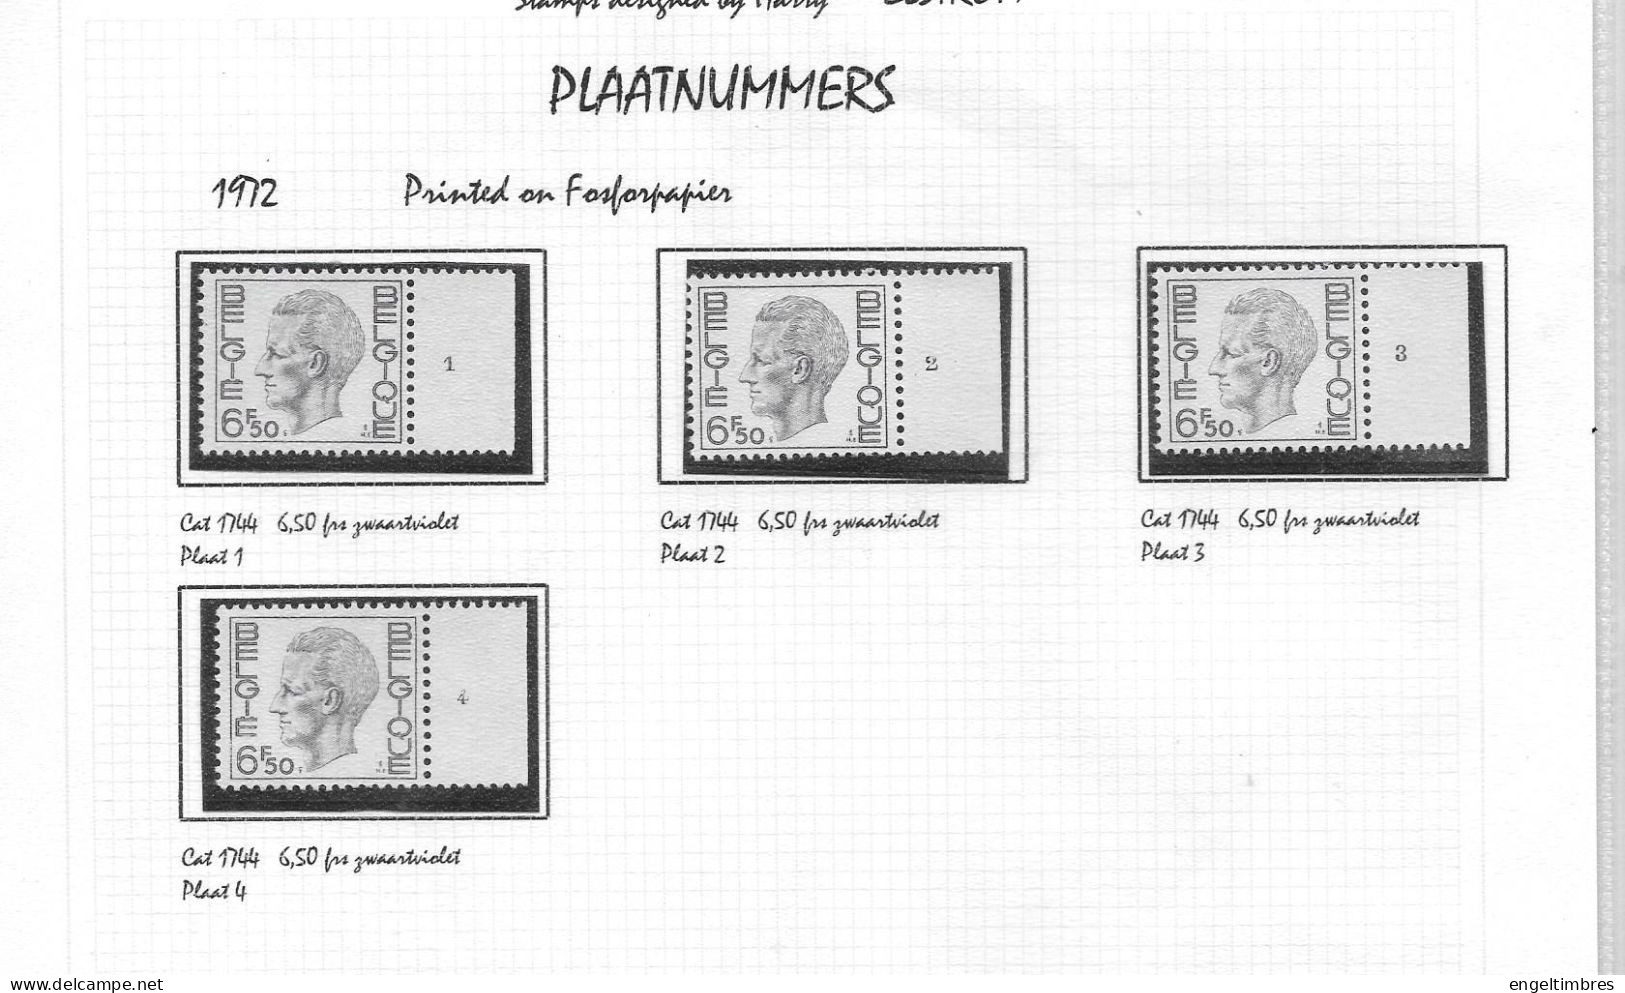 Belgium - Large selection of ELSTROM stamps - all POSTFRIS - and all with Plaatnummer